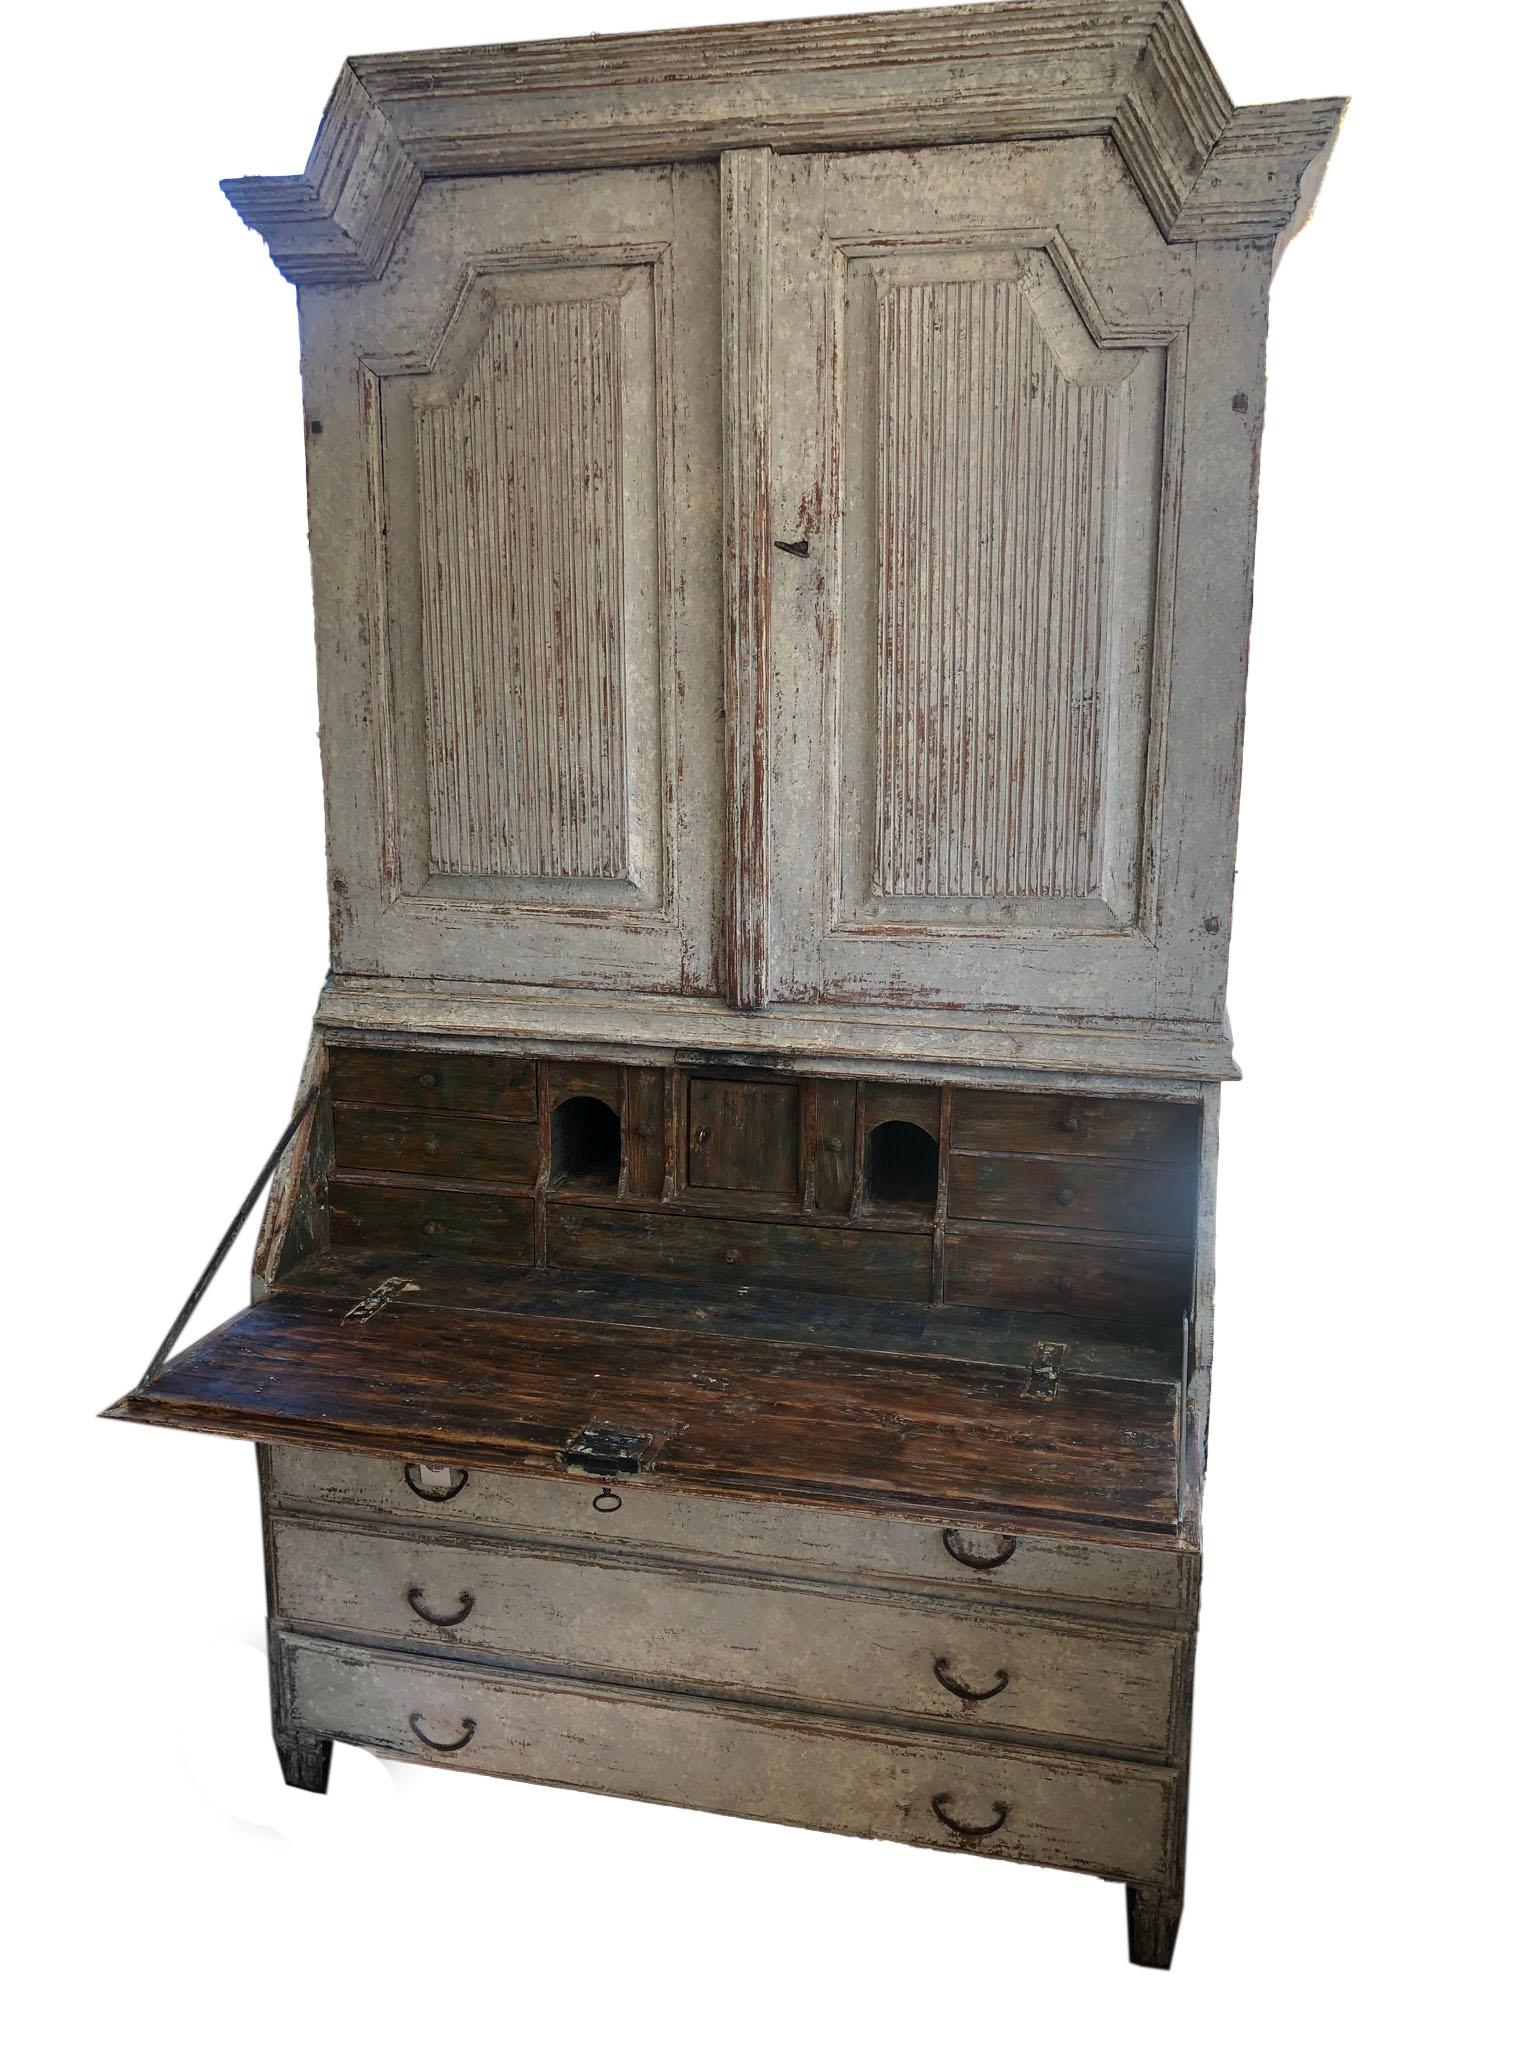 This is an exquisite Swedish Gustavian period painted secretary with library. Brass hardware and original locks, circa 1820. The upper section has three shelves, behind shaped and reeded door. The lower section has a slant front. The finish shut it